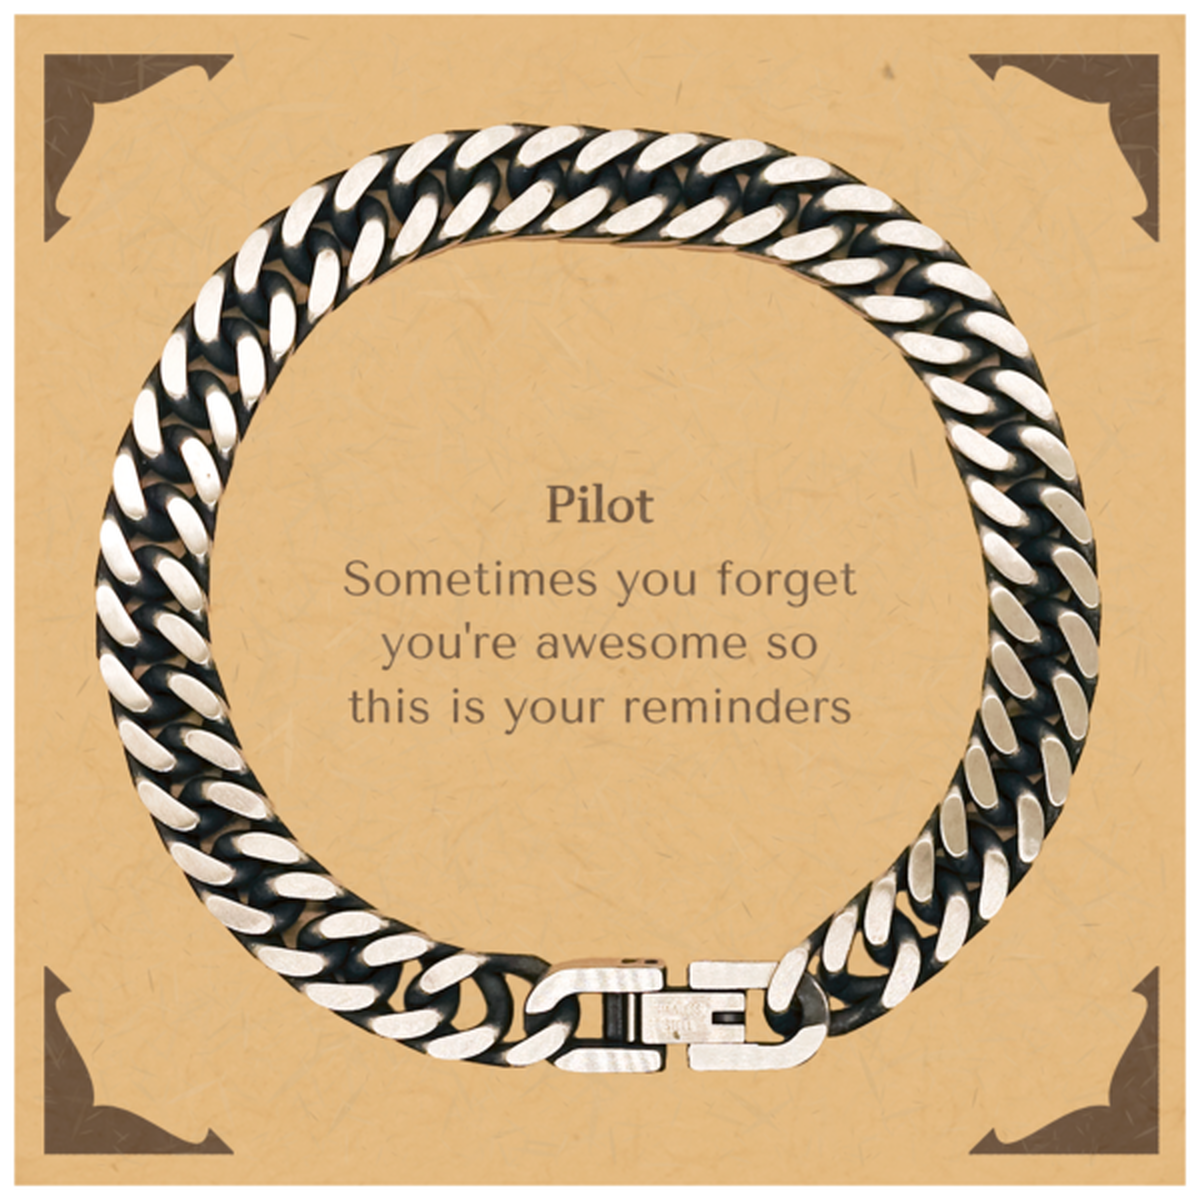 Sentimental Pilot Cuban Link Chain Bracelet, Pilot Sometimes you forget you're awesome so this is your reminders, Graduation Christmas Birthday Gifts for Pilot, Men, Women, Coworkers